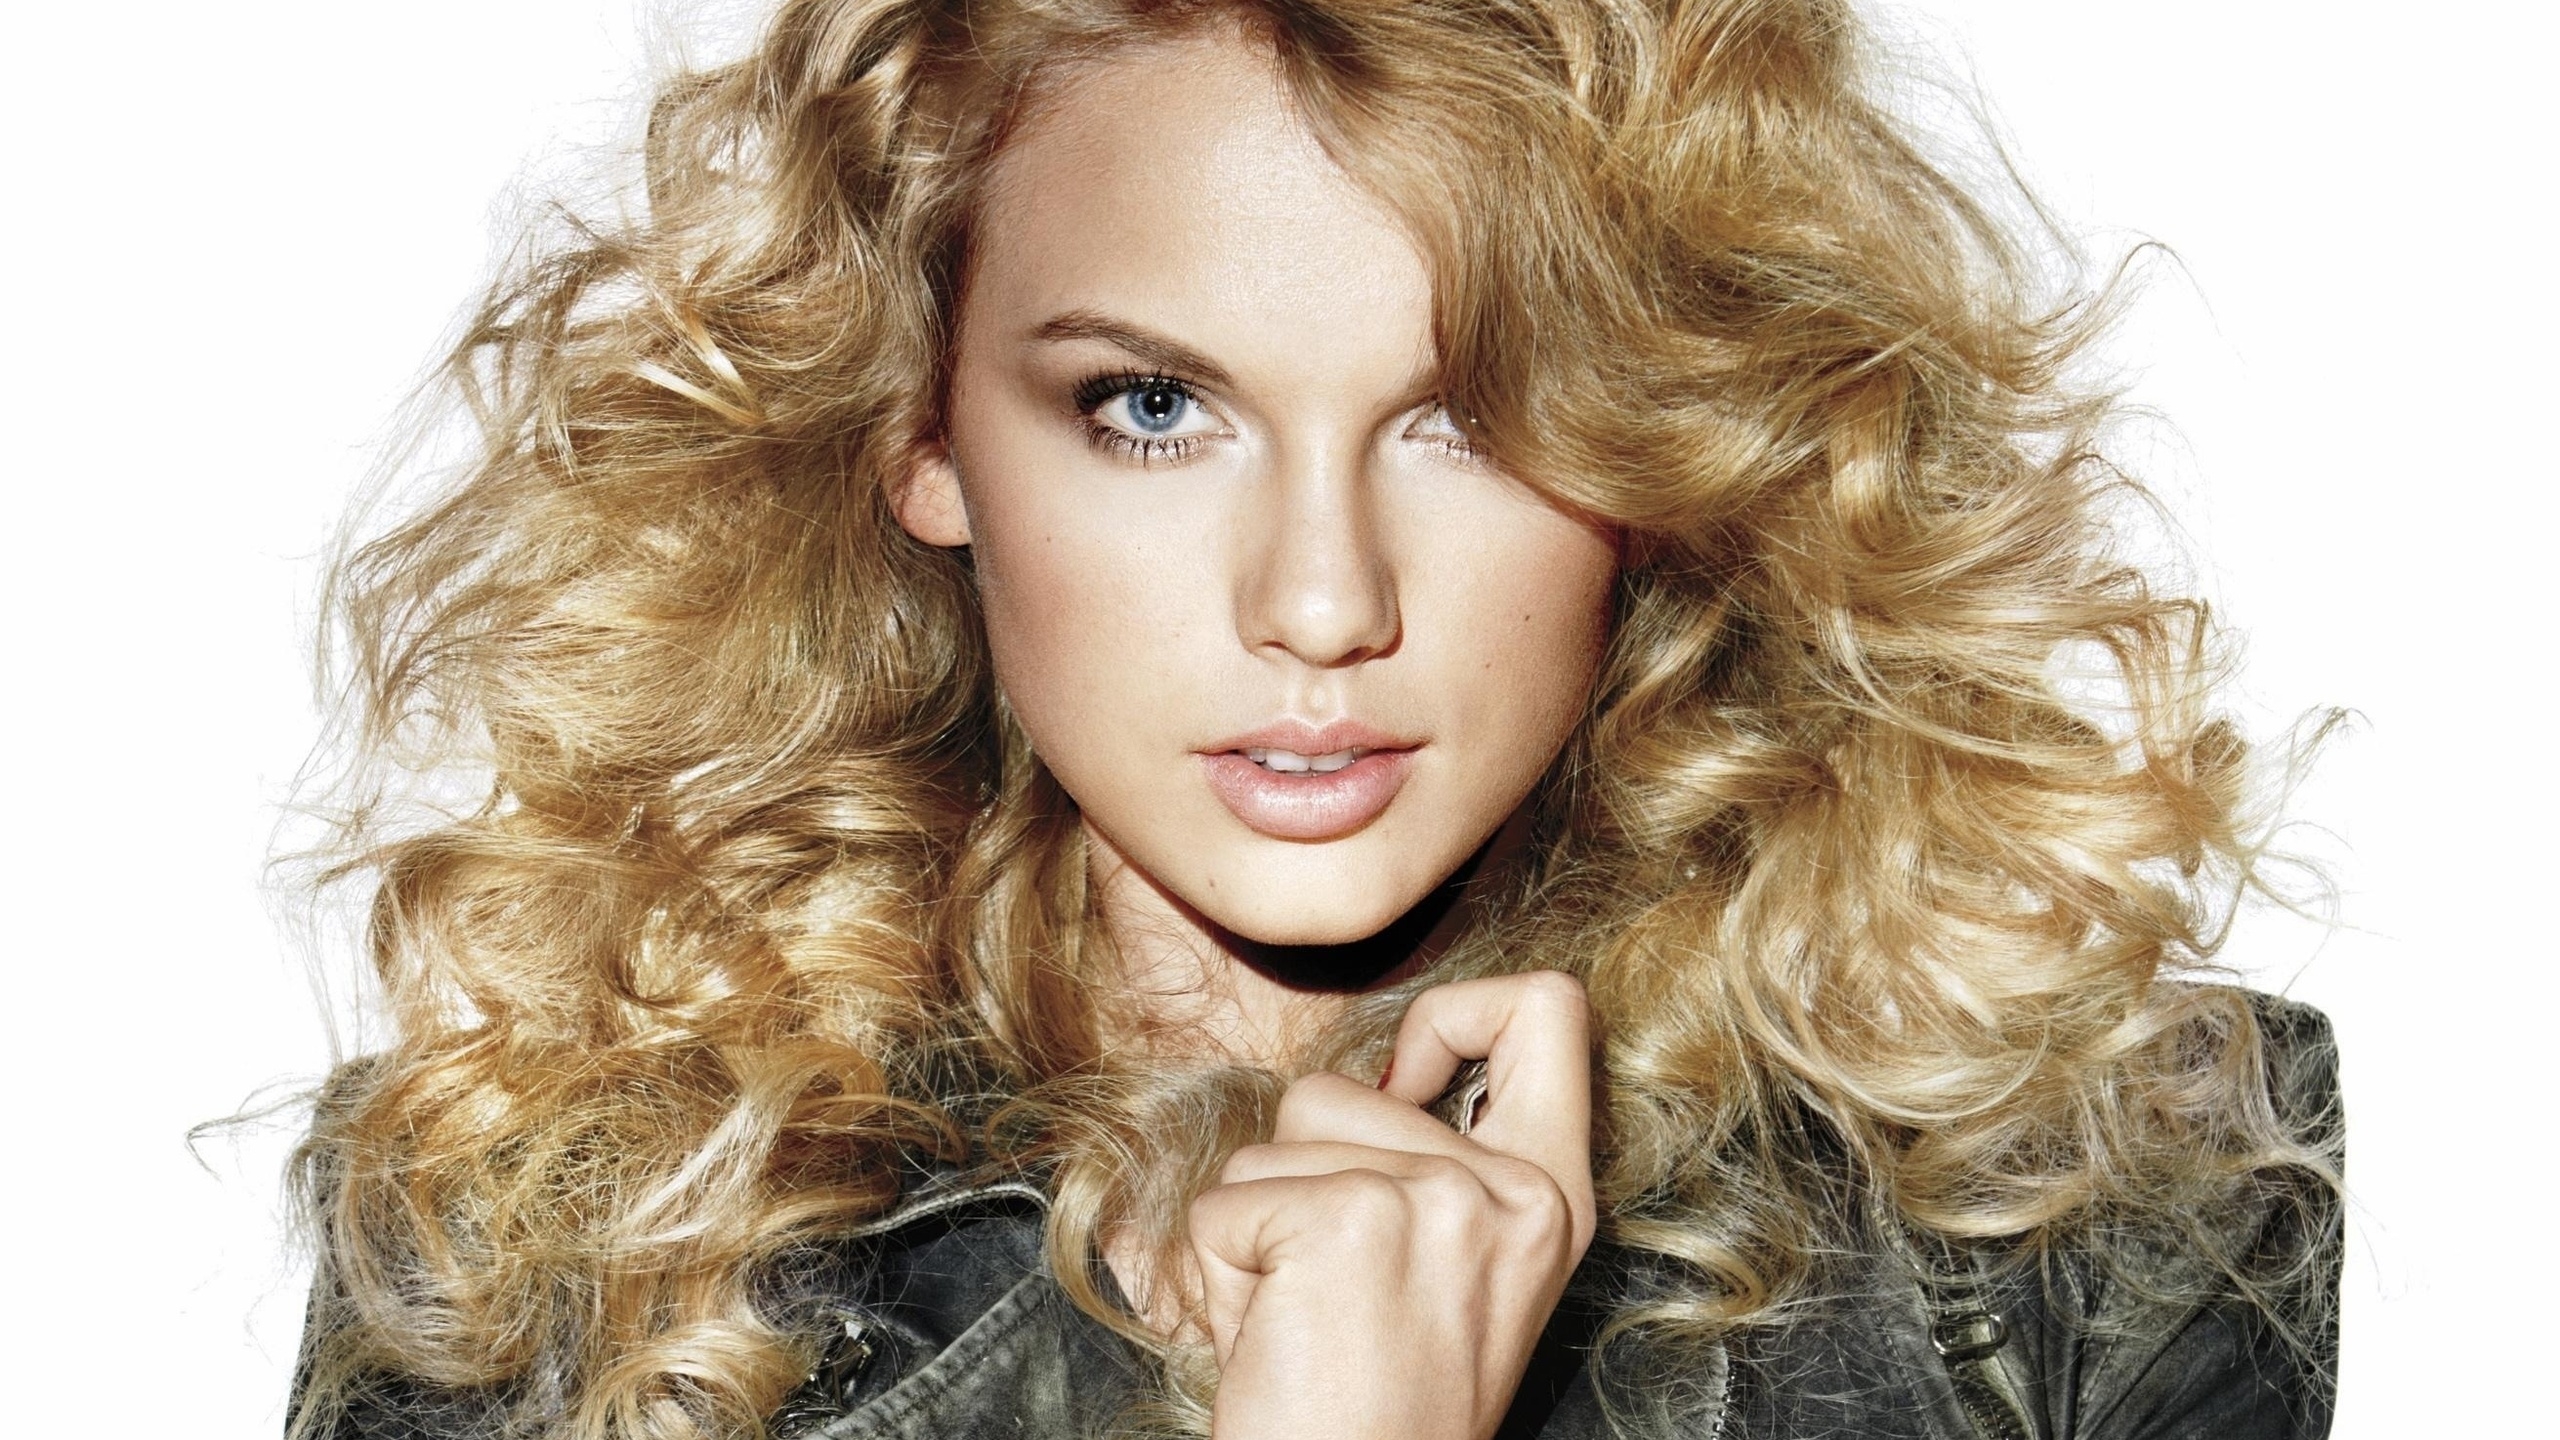 Taylor Swift Curly Hair for 2560x1440 HDTV resolution